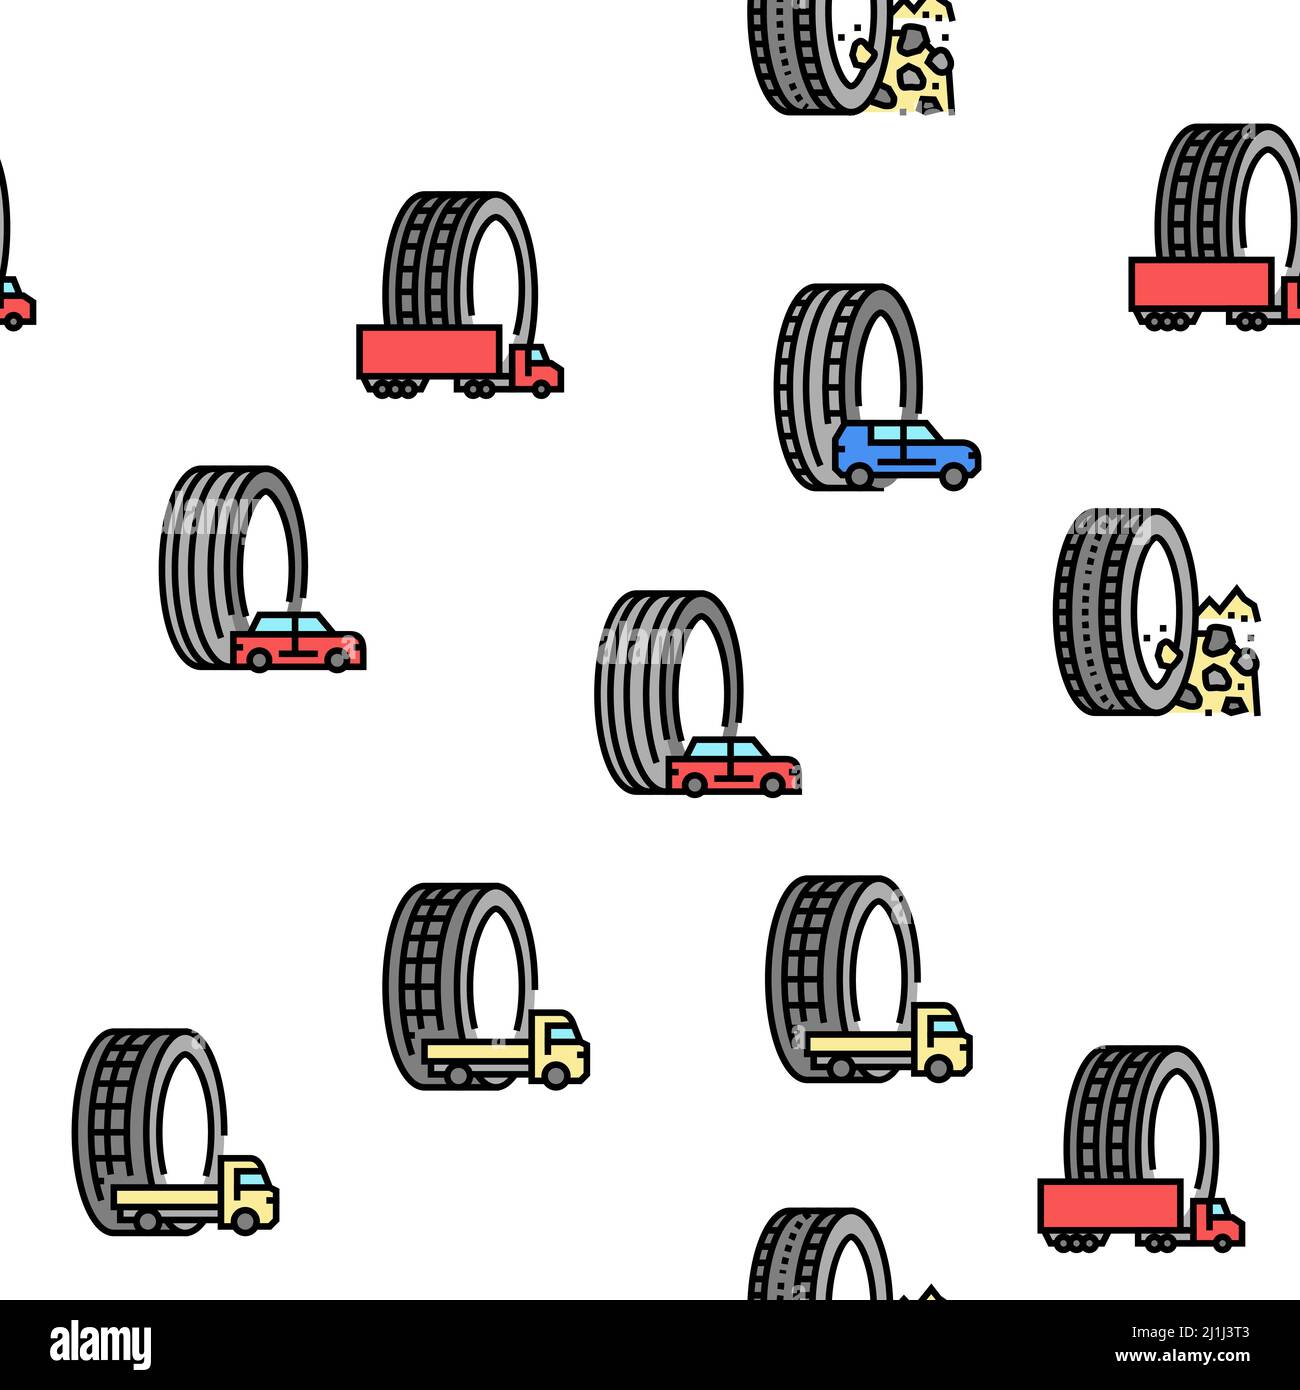 Used Tire Sale Shop Business Icons Set Vector Stock Vector